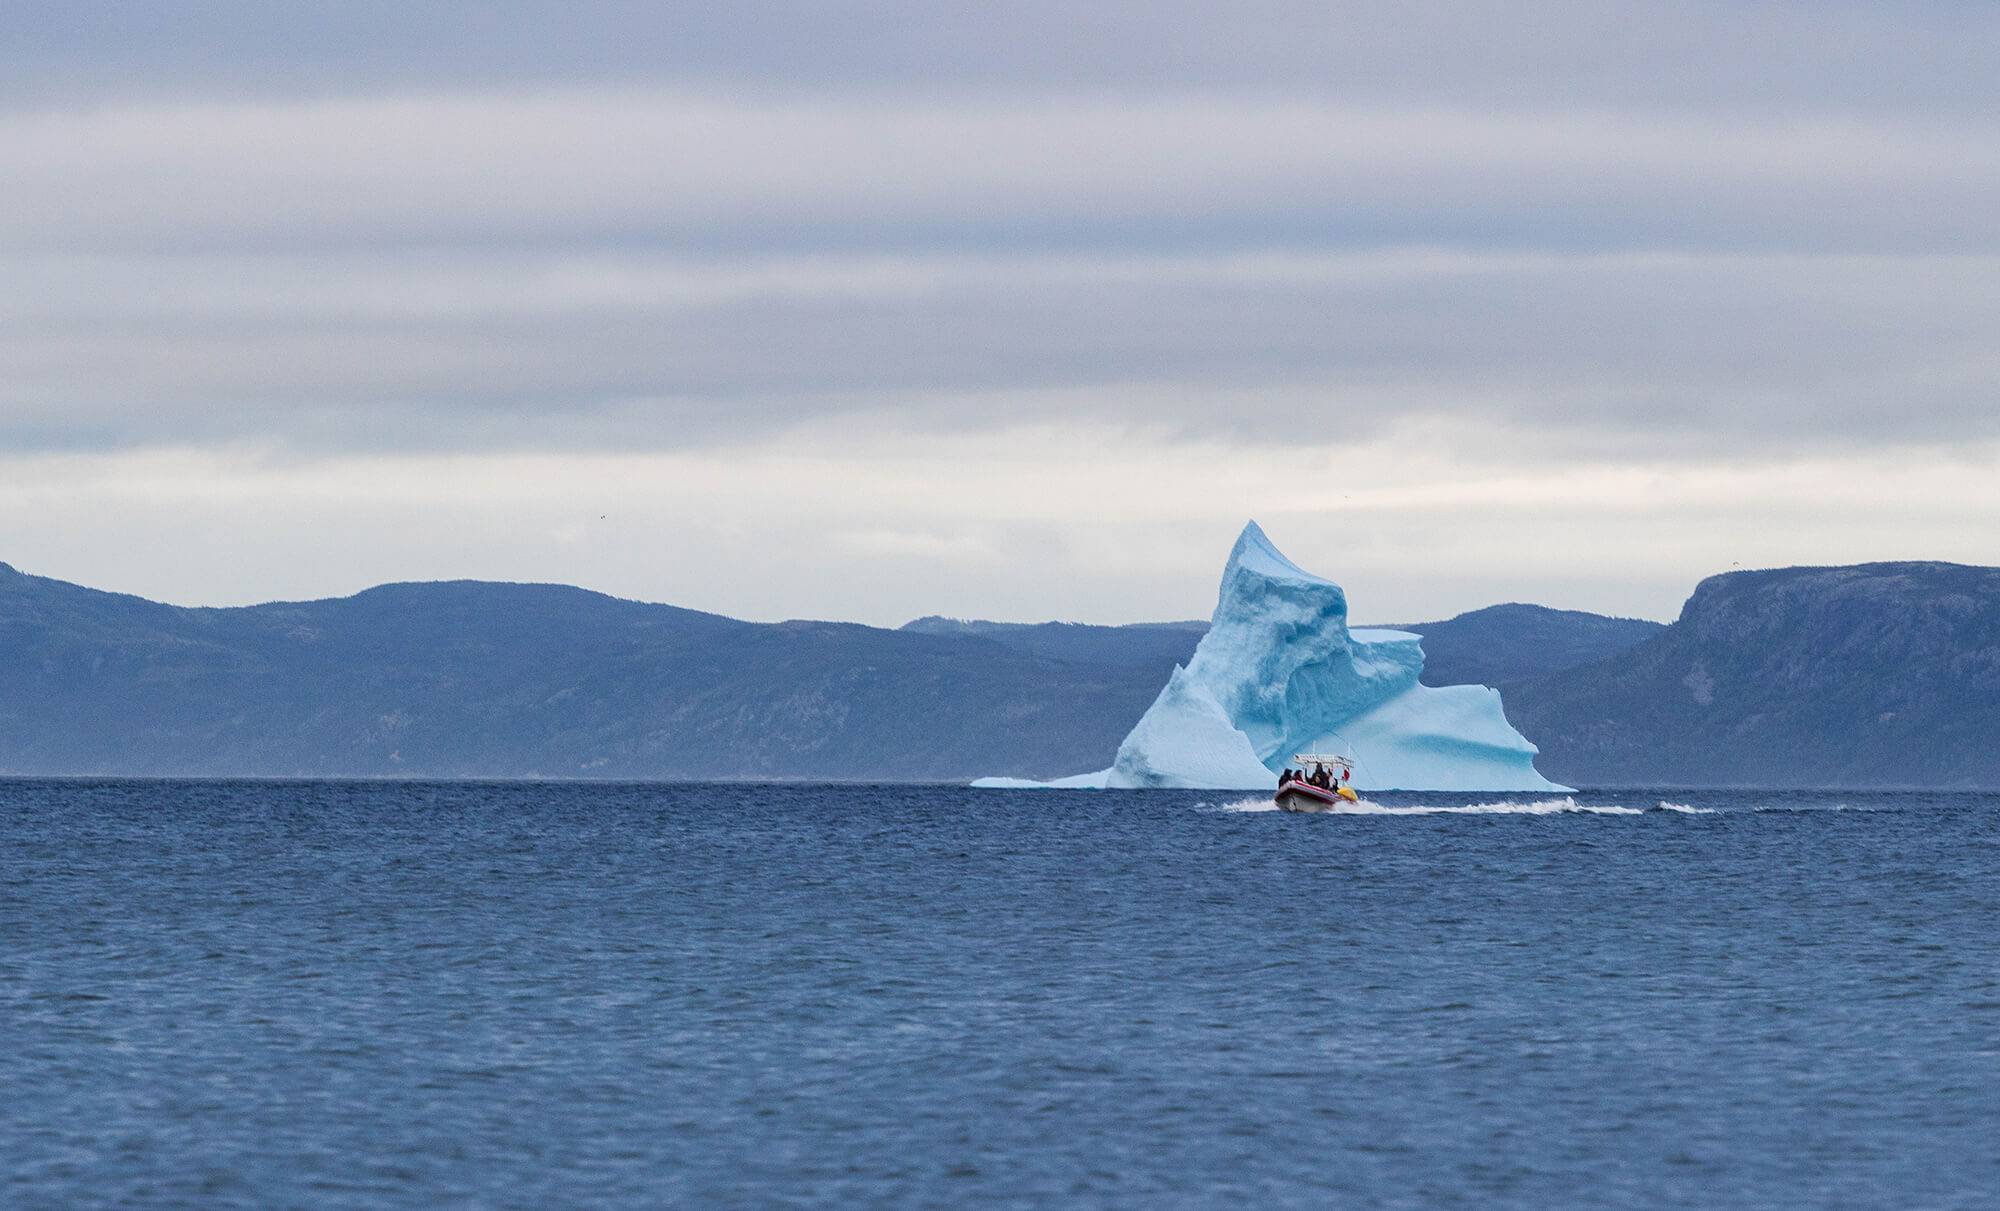 A Large Iceberg On The Horizon In Newfoundland With A Small Boat Driving Around, Conception Bay, Newfoundland And Labrador, Canada